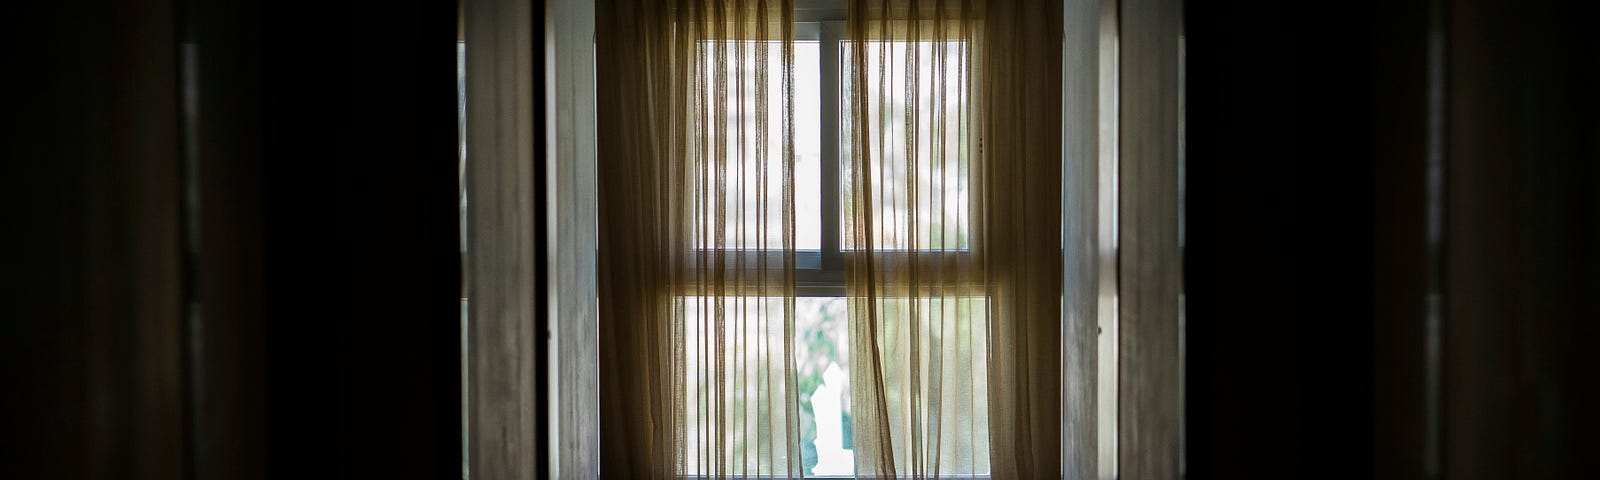 A curtained window at the end of a darkened hallway